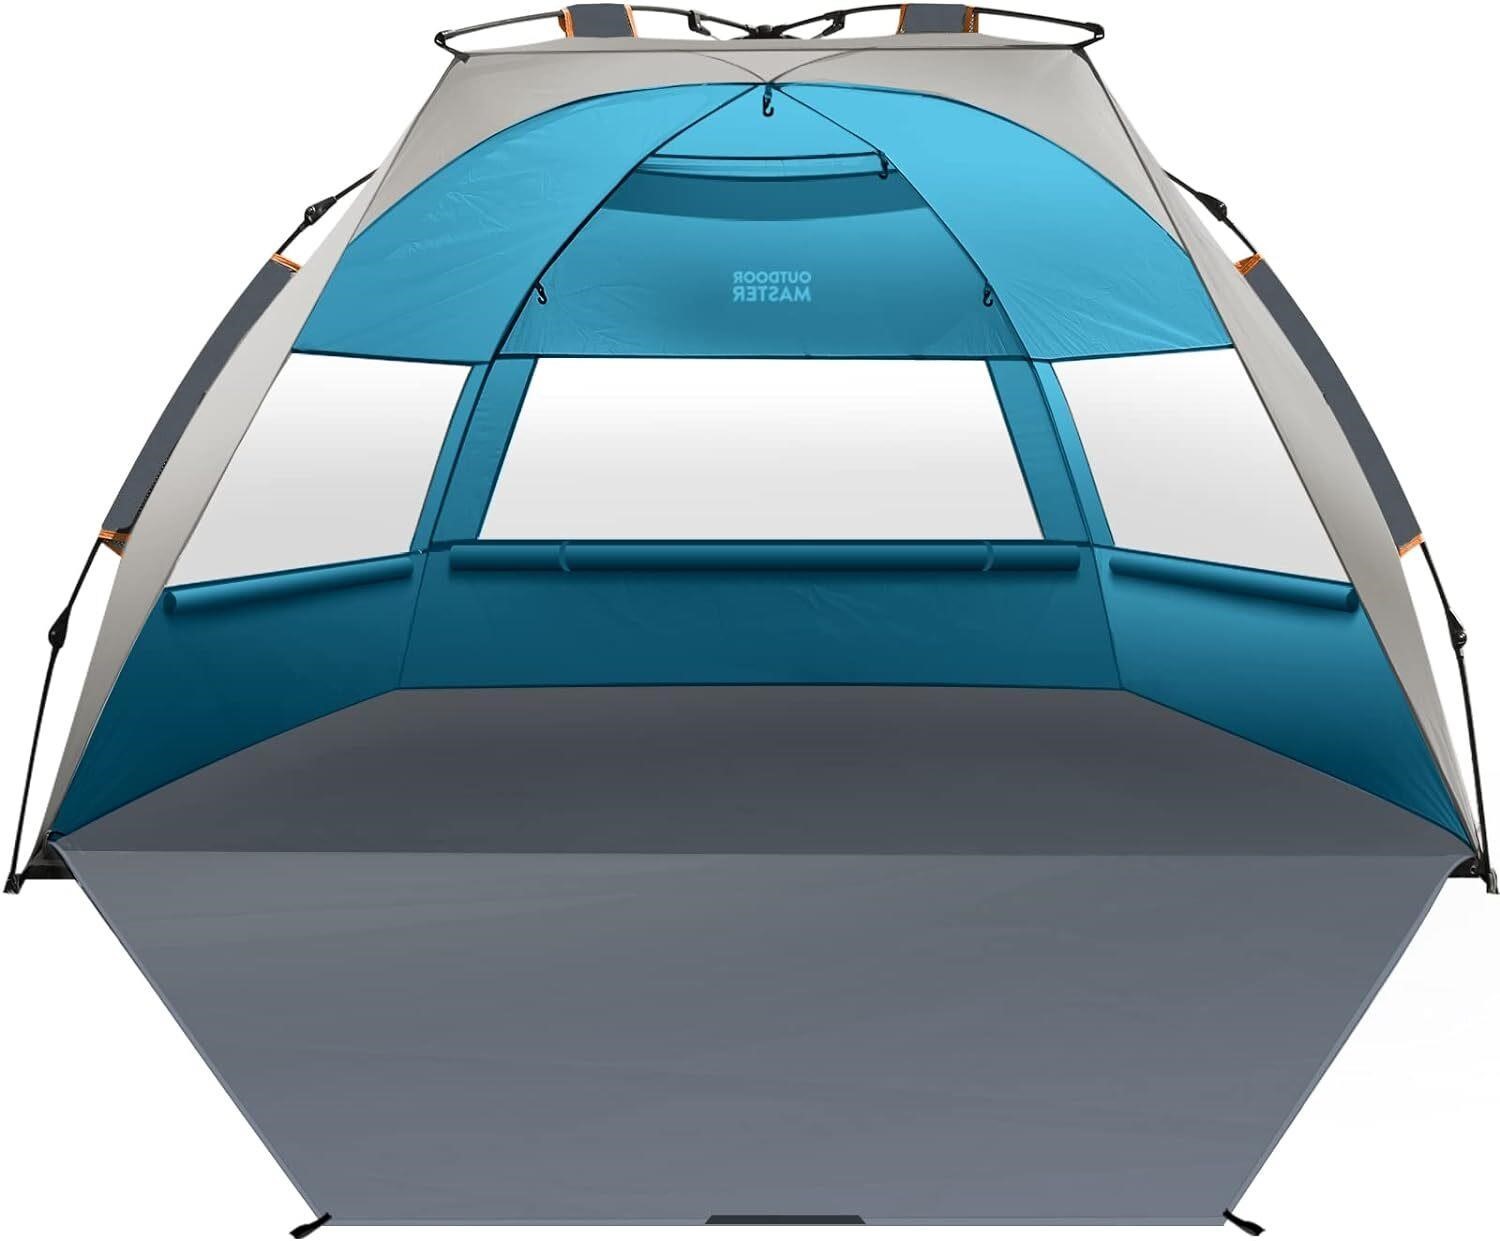 OutdoorMaster 3-4 Person Beach Tent X-Large